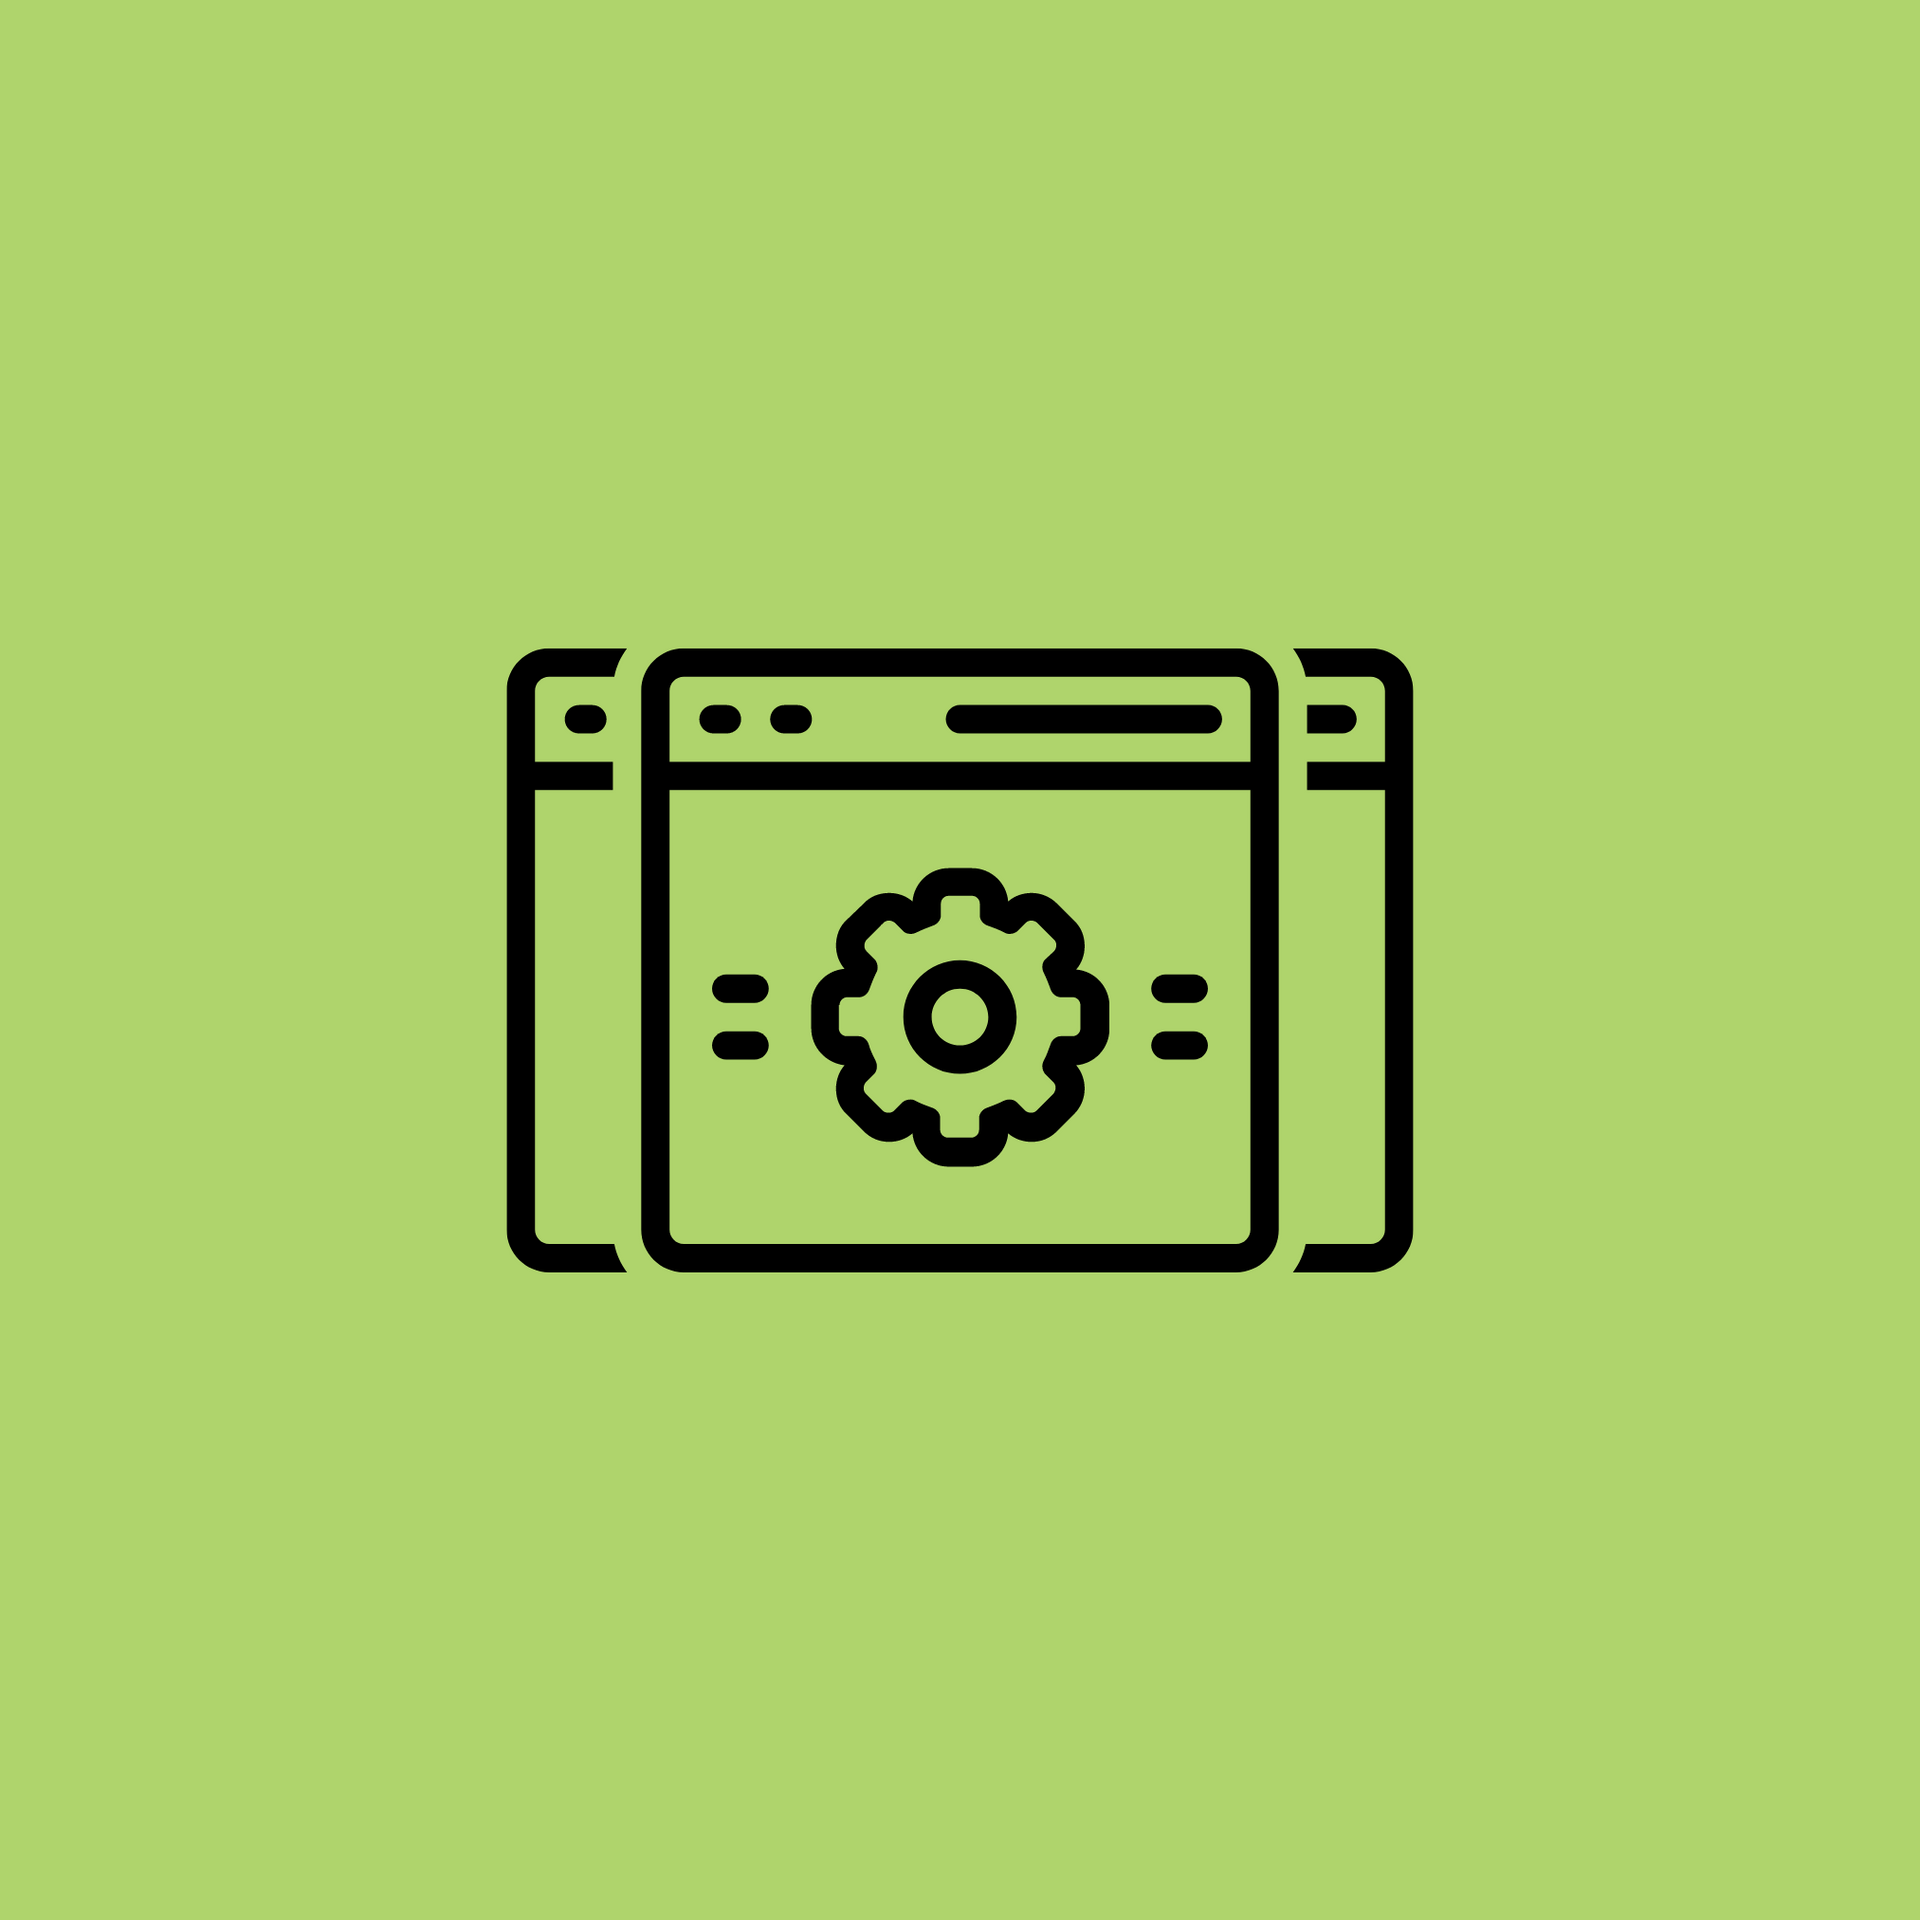 A line icon of a browser window with a flower on it on a green background.